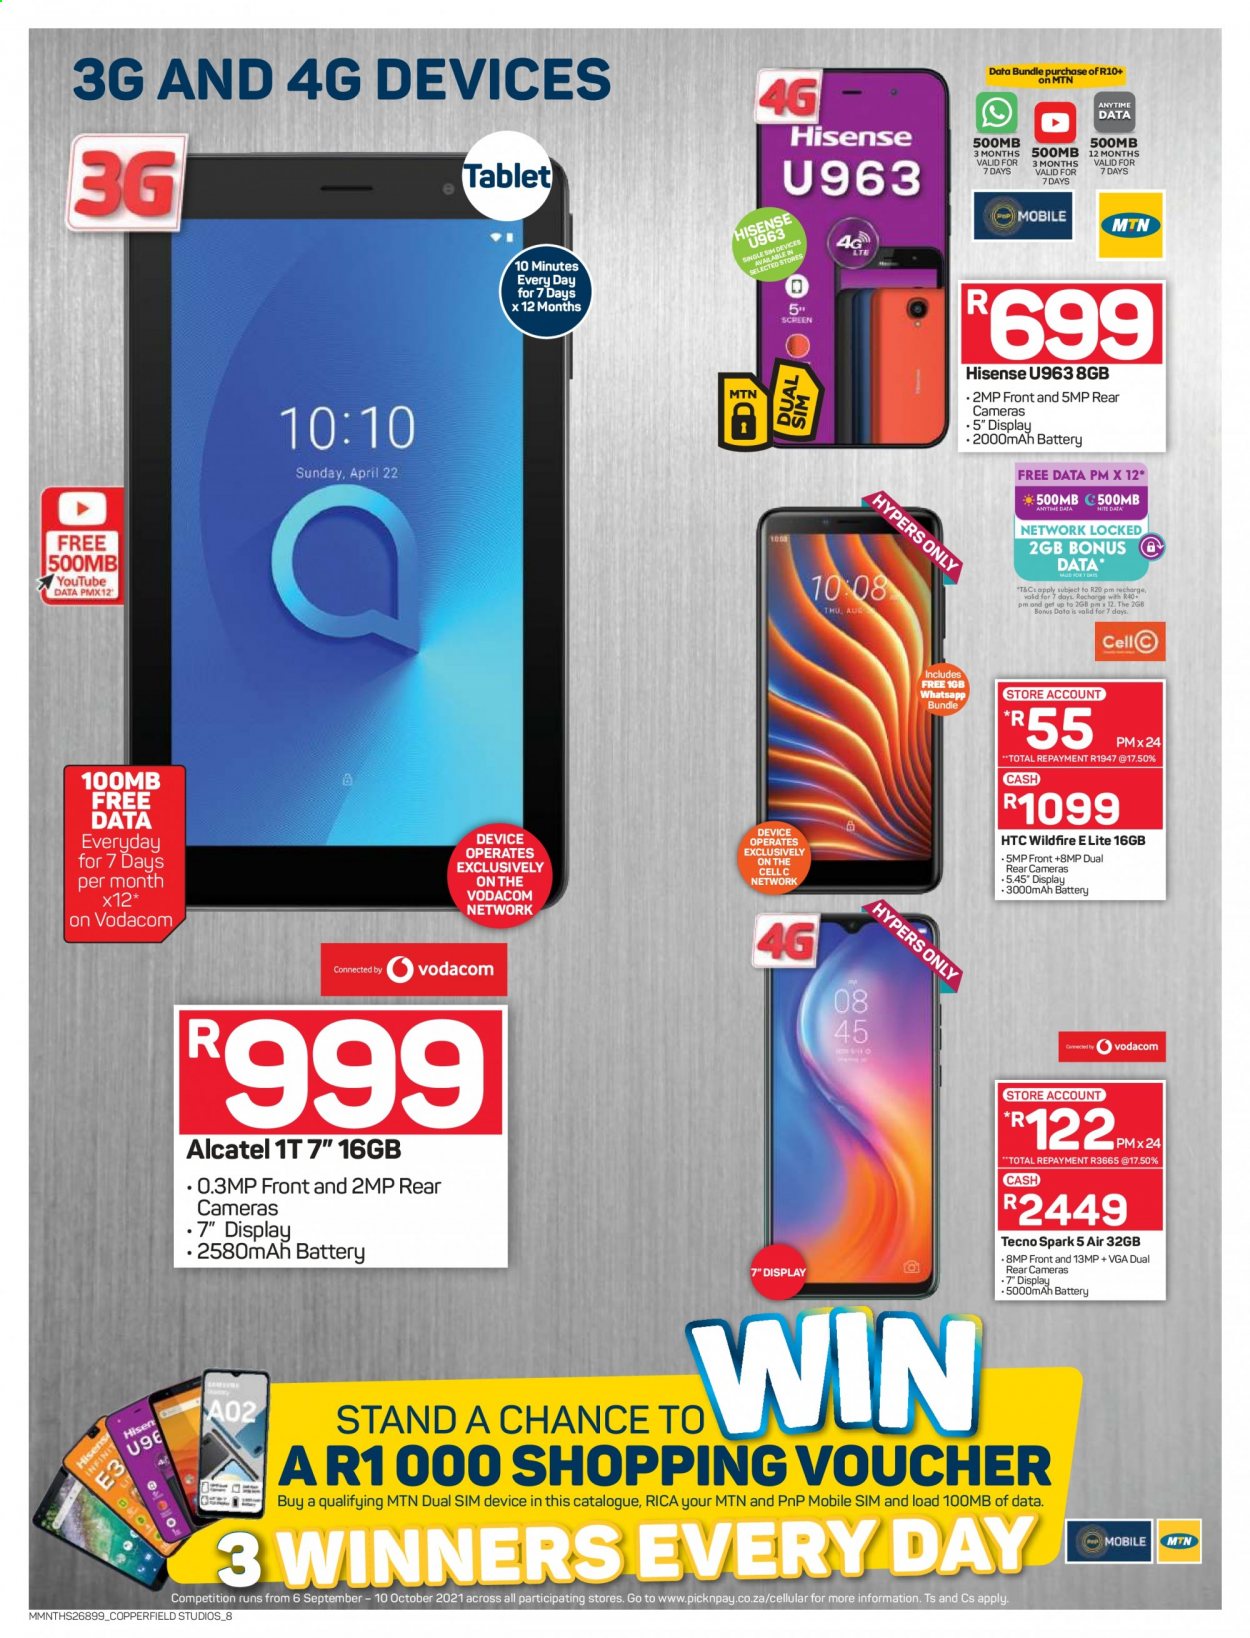 Pick n Pay specials - 09.06.2021 - 10.31.2021. 